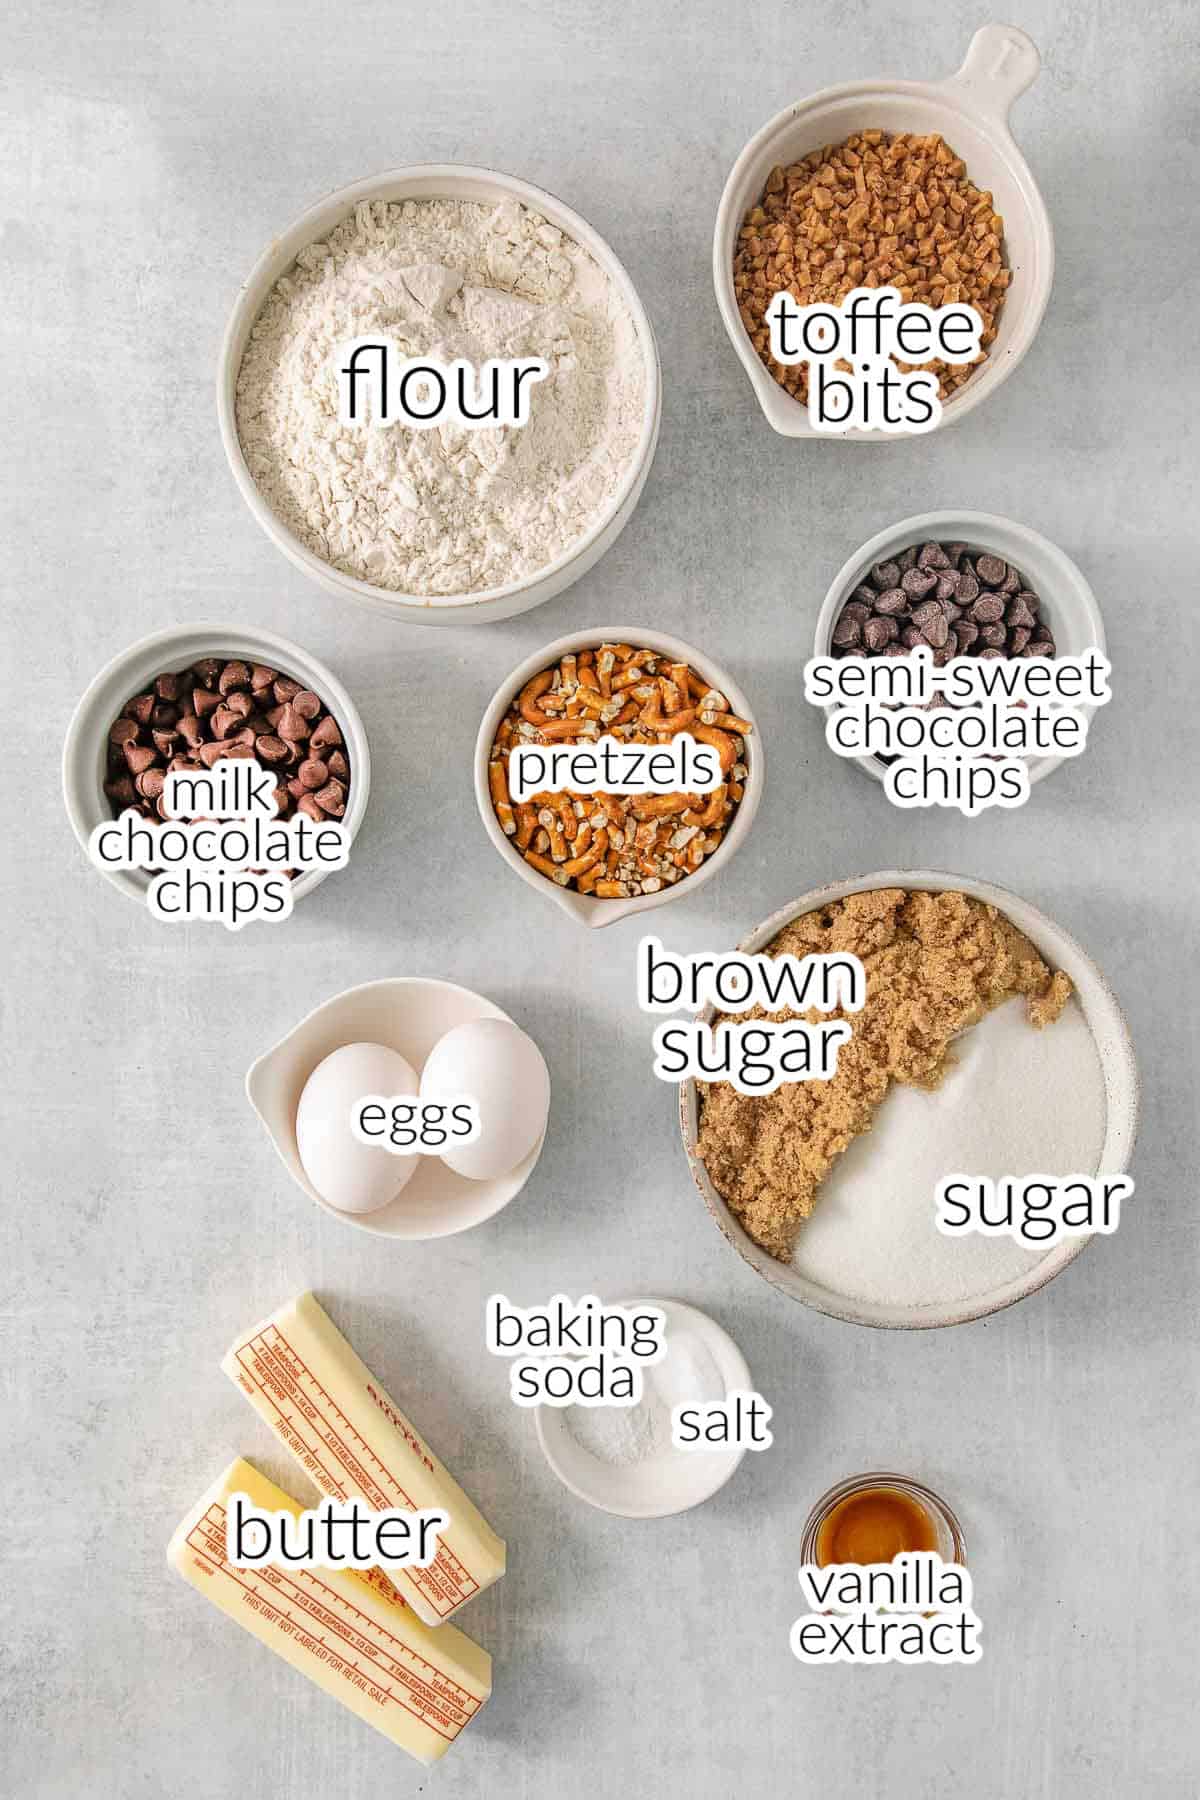 Ingredients for Kitchen Sink Cookies - flour, toffee bits, semi sweet chocolate chips, pretzels, milk chocolate chips, eggs, brown sugar, sugar, butter, baking soda, salt, and vanilla extract.